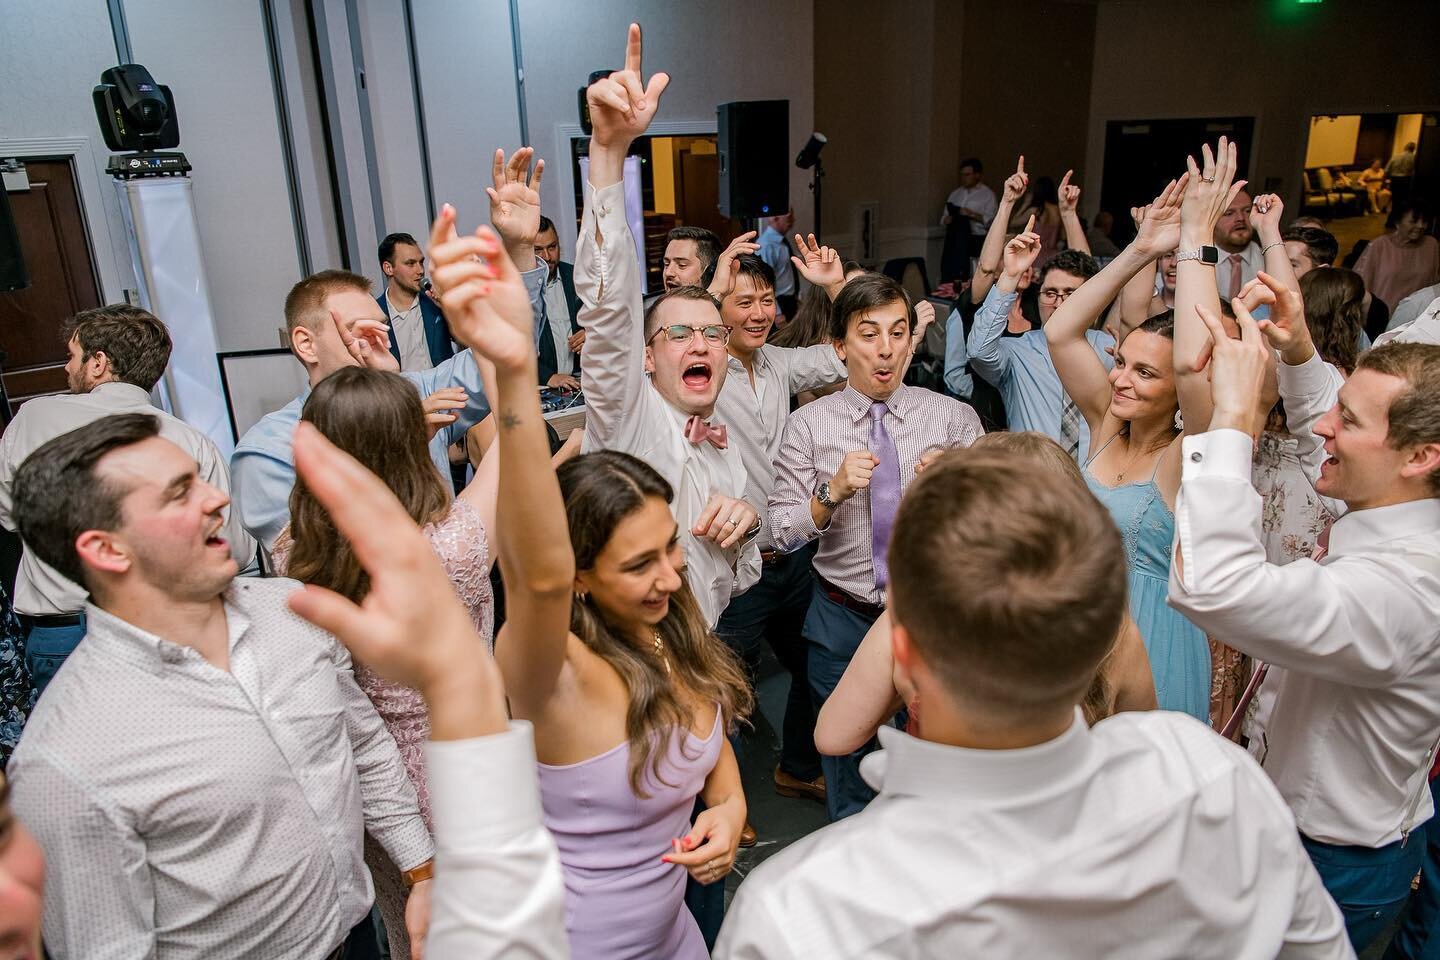 What an incredible wedding. The energy all night was electric. 
This is why we LOVE what we do! 💪🏼🙏🏼 

📸: @mindybriarphotography 

#wedding #groom #energy #whatwedo #weddinghosts #MC #DJ #djservices #entertainment #bride #couples #party #evermor